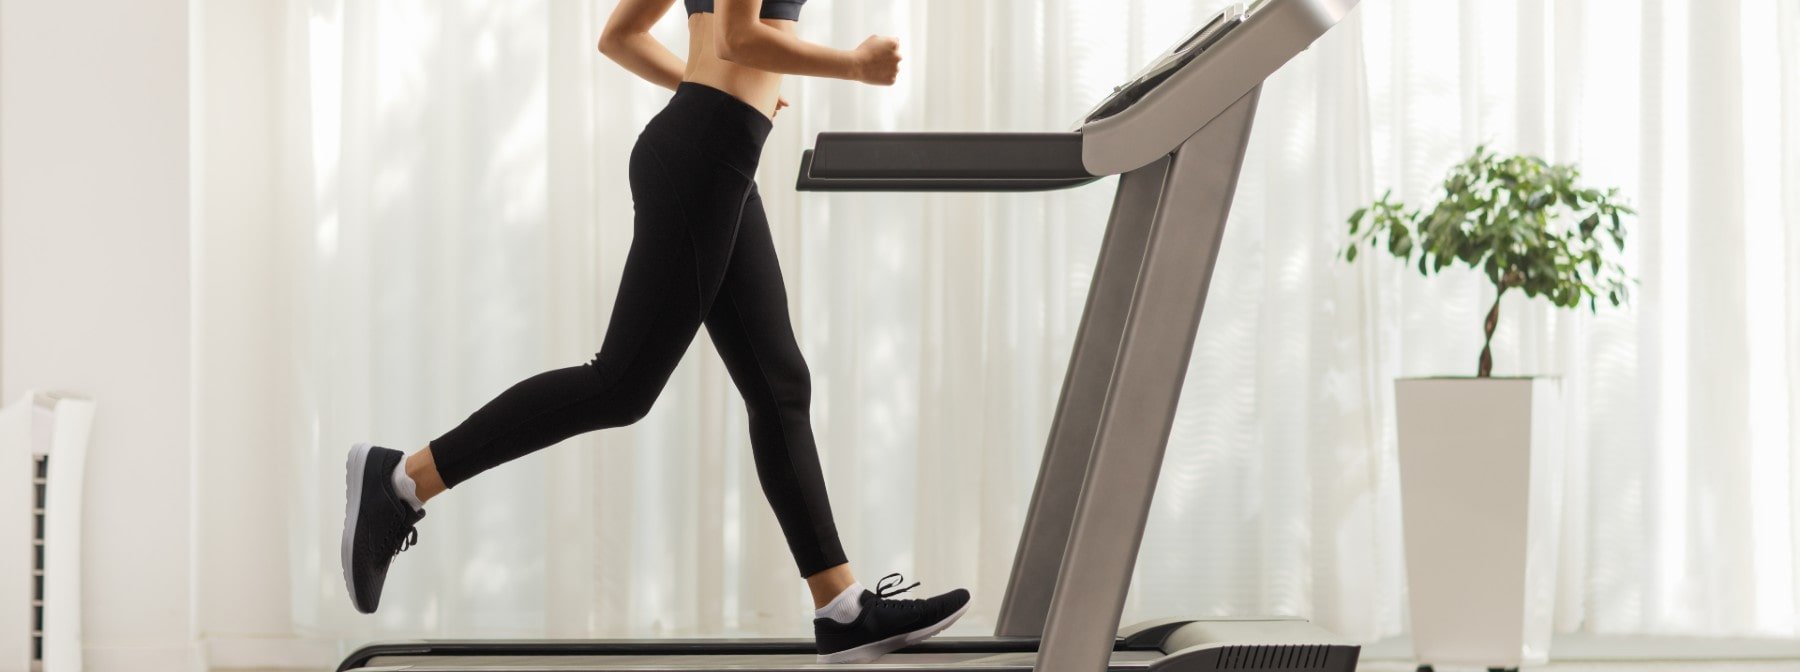 Treadmill Workouts: PT Reviews 12-3-30 & 10-2-20